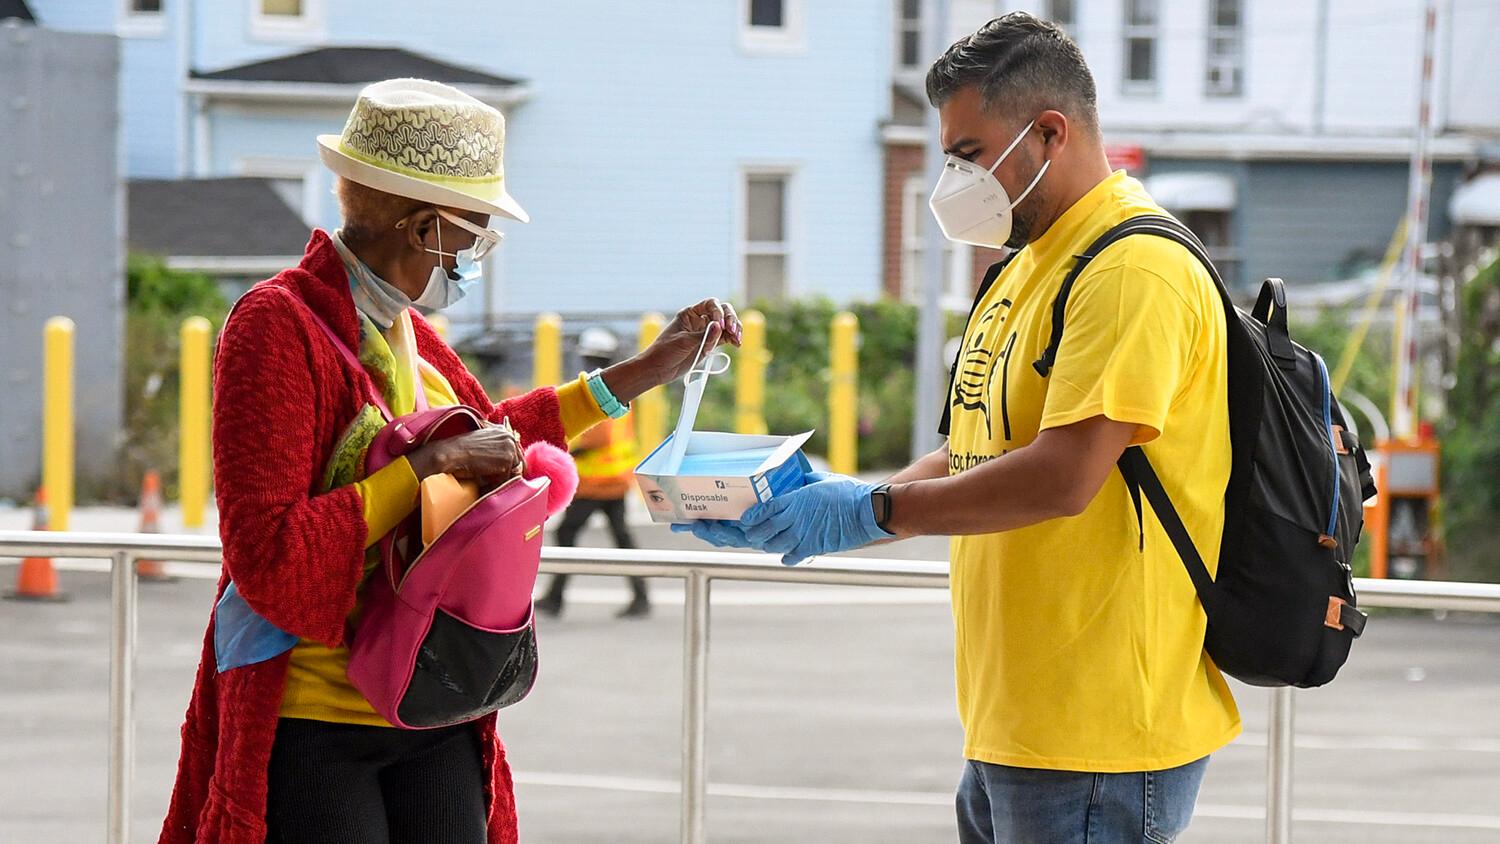 A volunteer offers a passer-by a face mask.